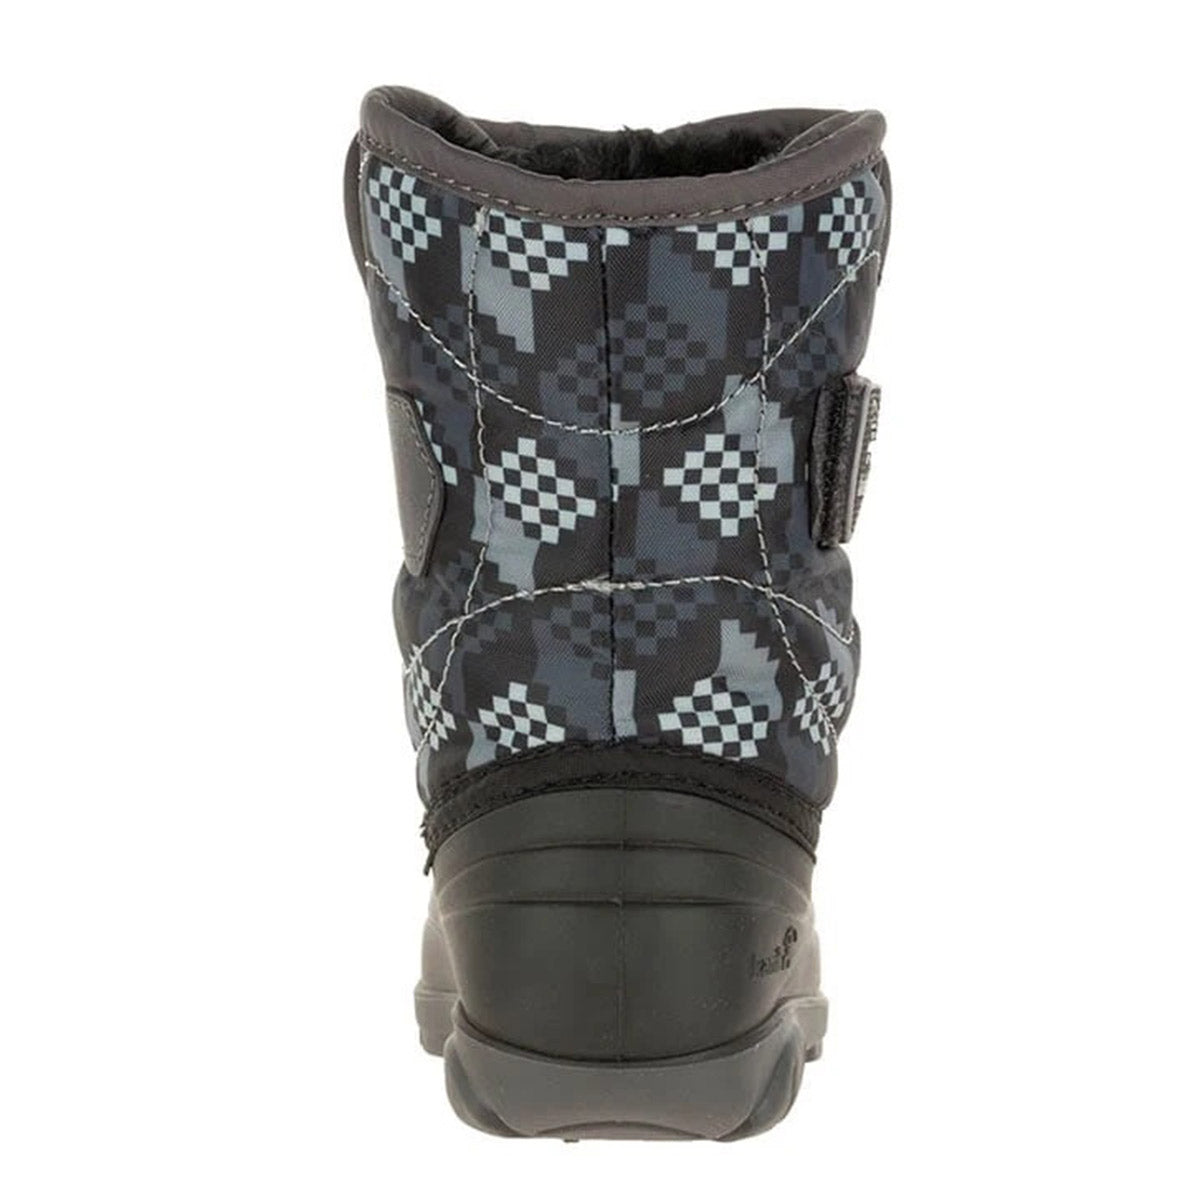 Kamik toddler snow boots featuring a black and gray checkered pattern, perfect for keeping little feet warm down to -10°F.